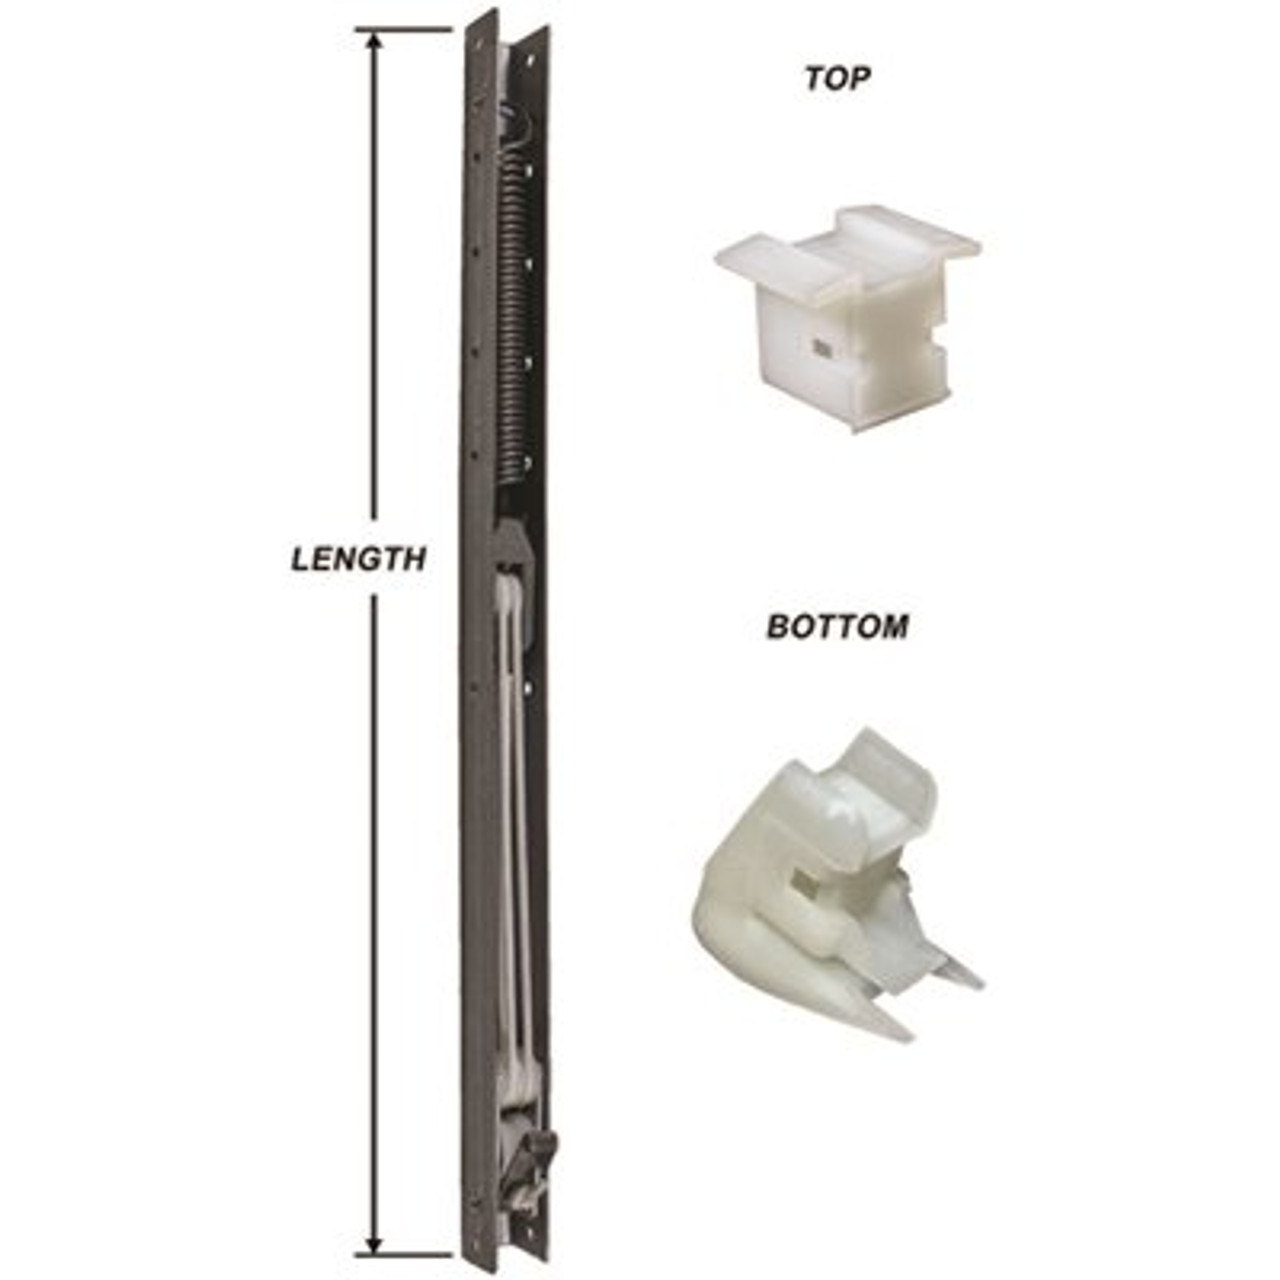 23 in. L Window Channel Balance 2210 with Top and Bottom End Brackets Attached 9/16 in. W x 5/8 in. D ( Pack of 10 )